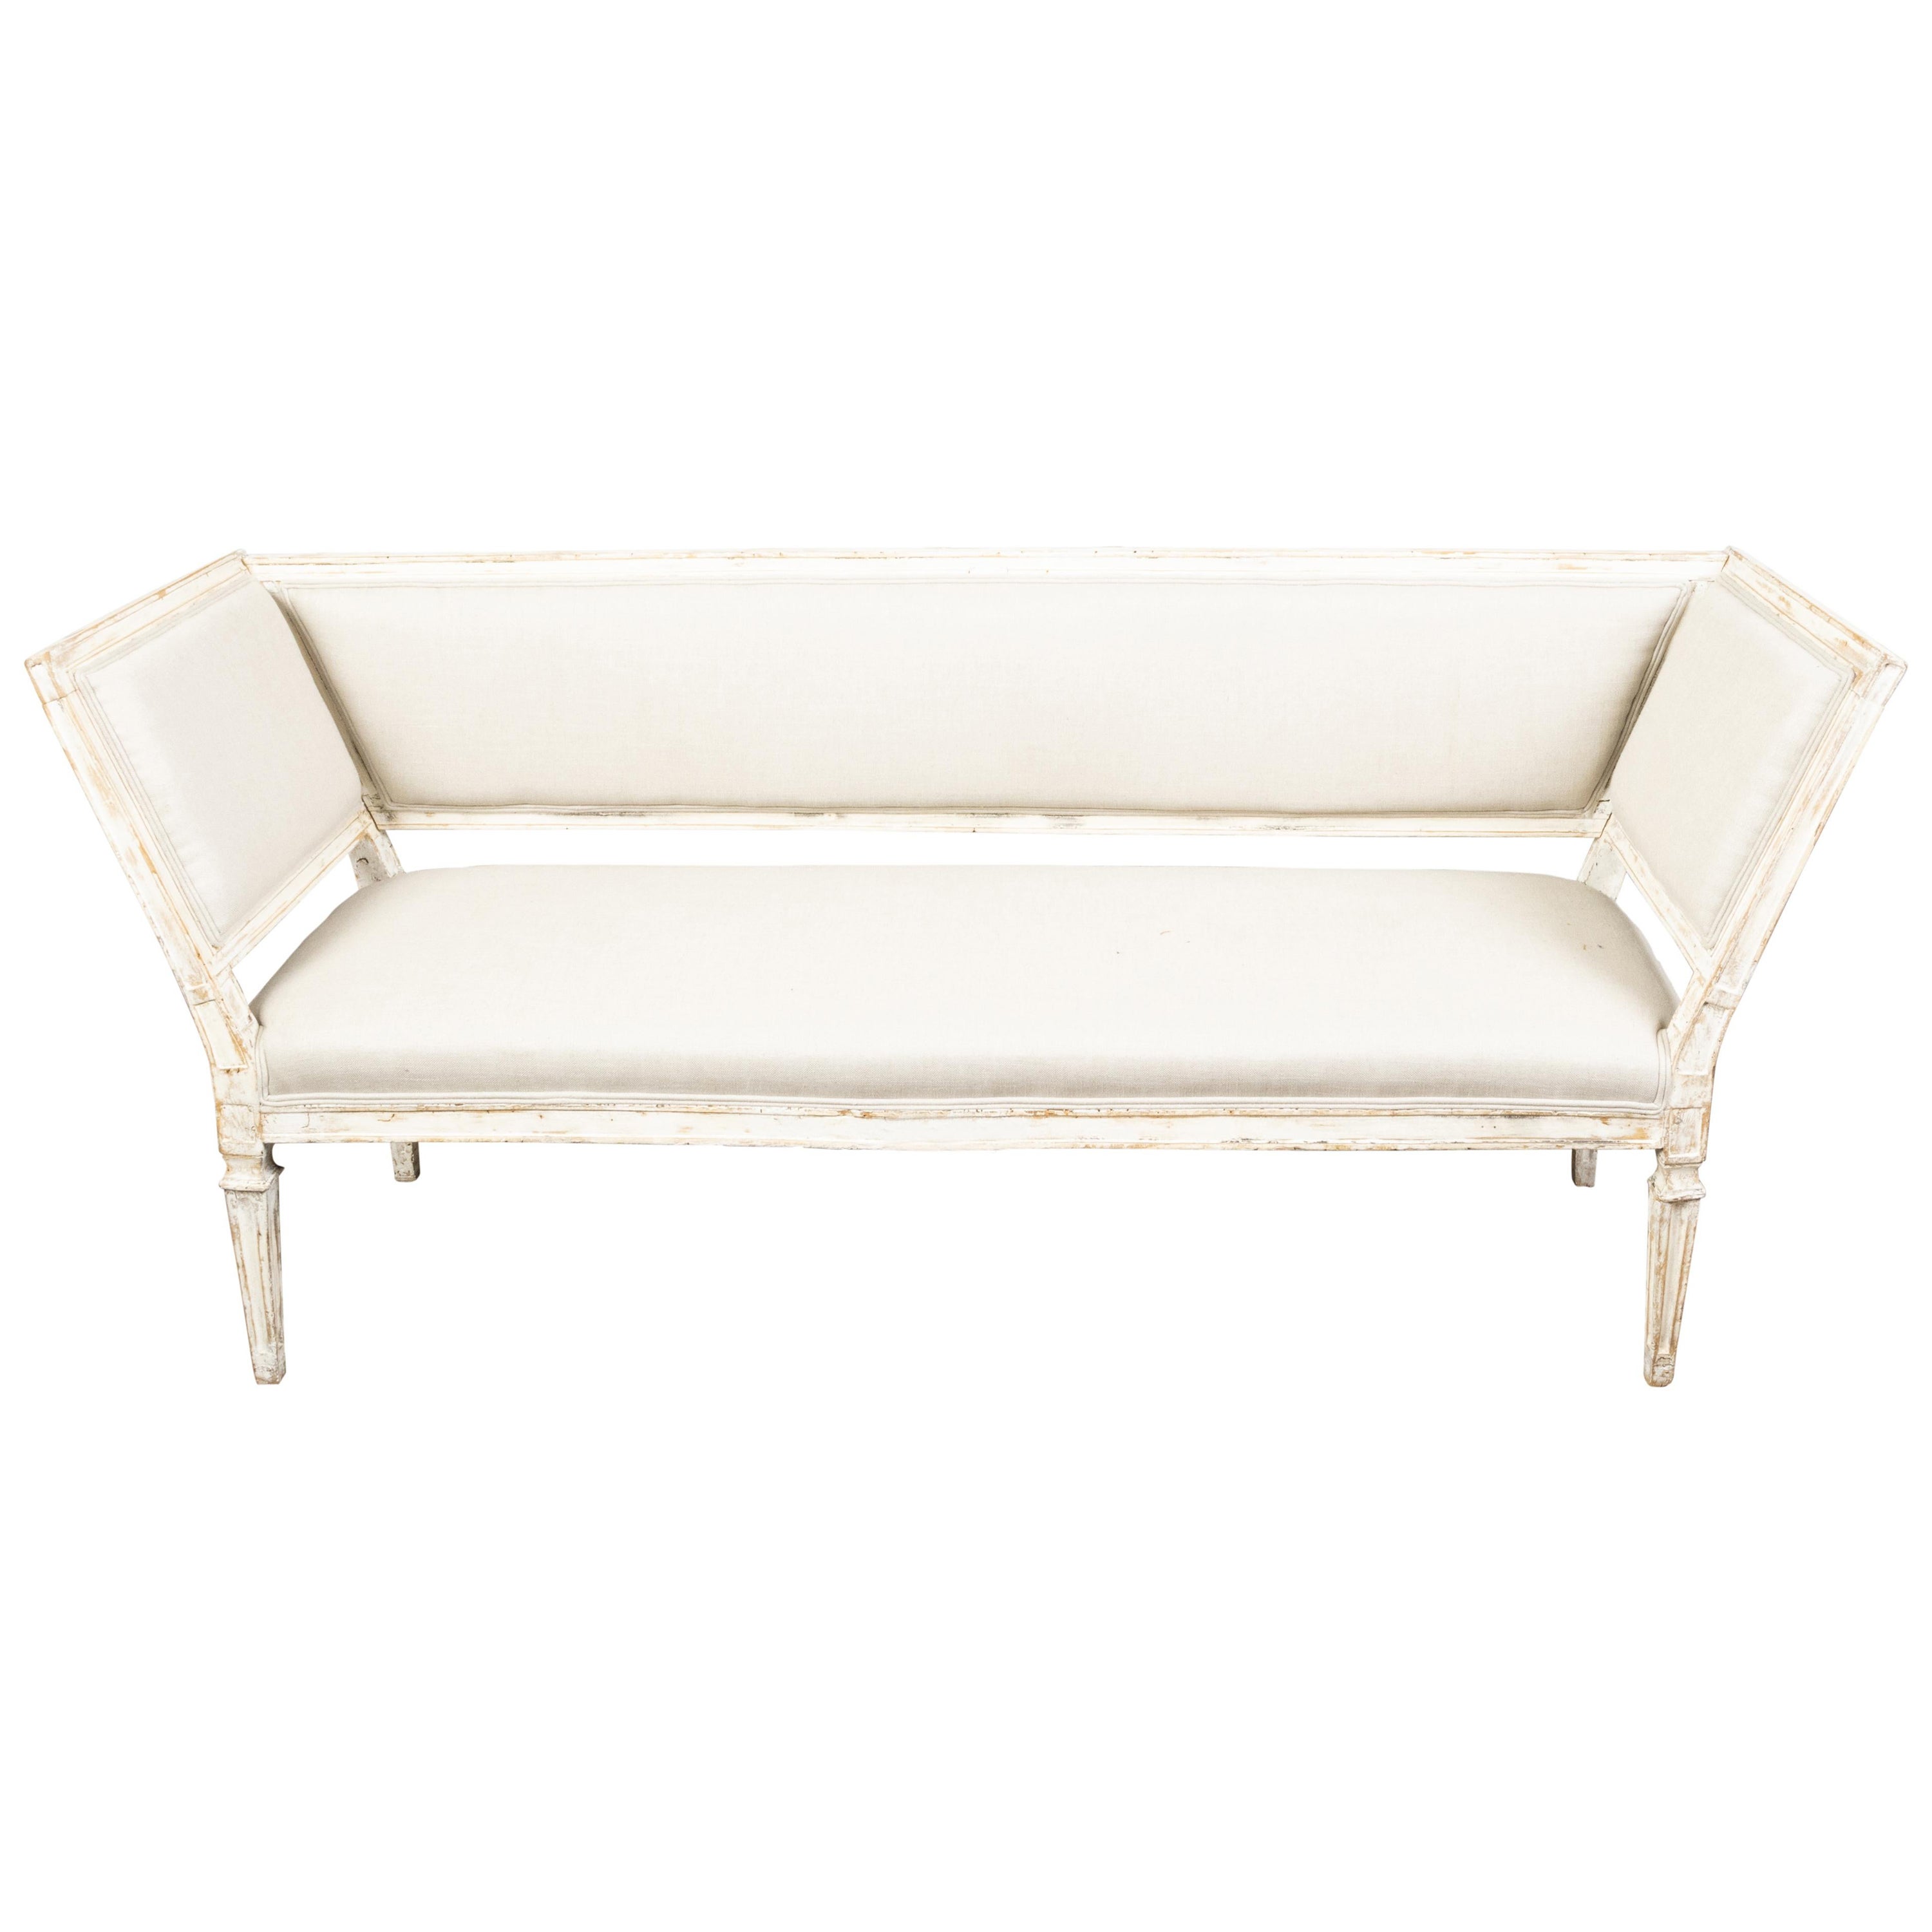 Italian 19th Century White Painted Sofa with Slanted Sides and Distressed Patina For Sale